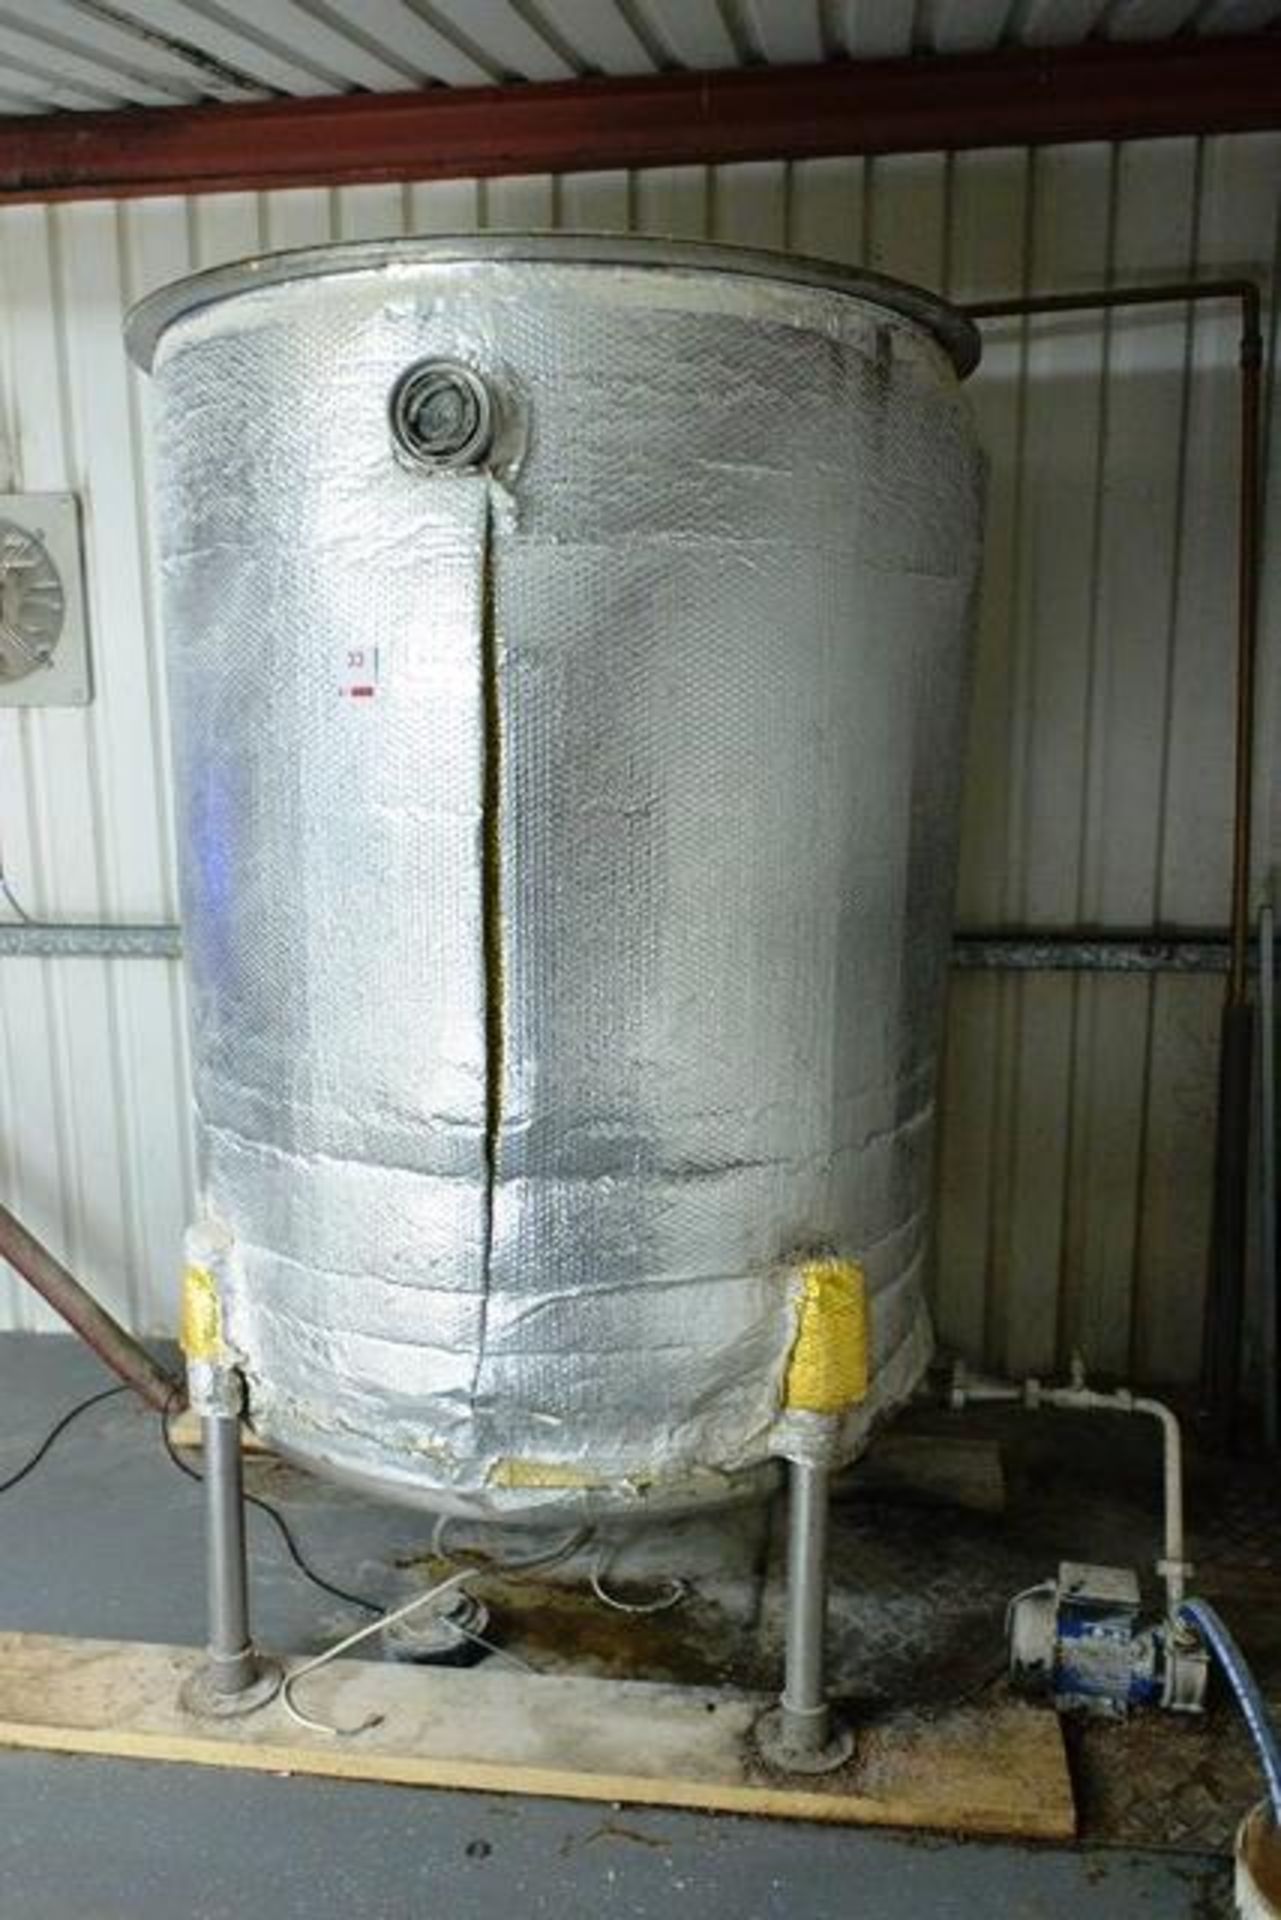 Hot water tank with transfer pump, 1100mm dia x 1700mm